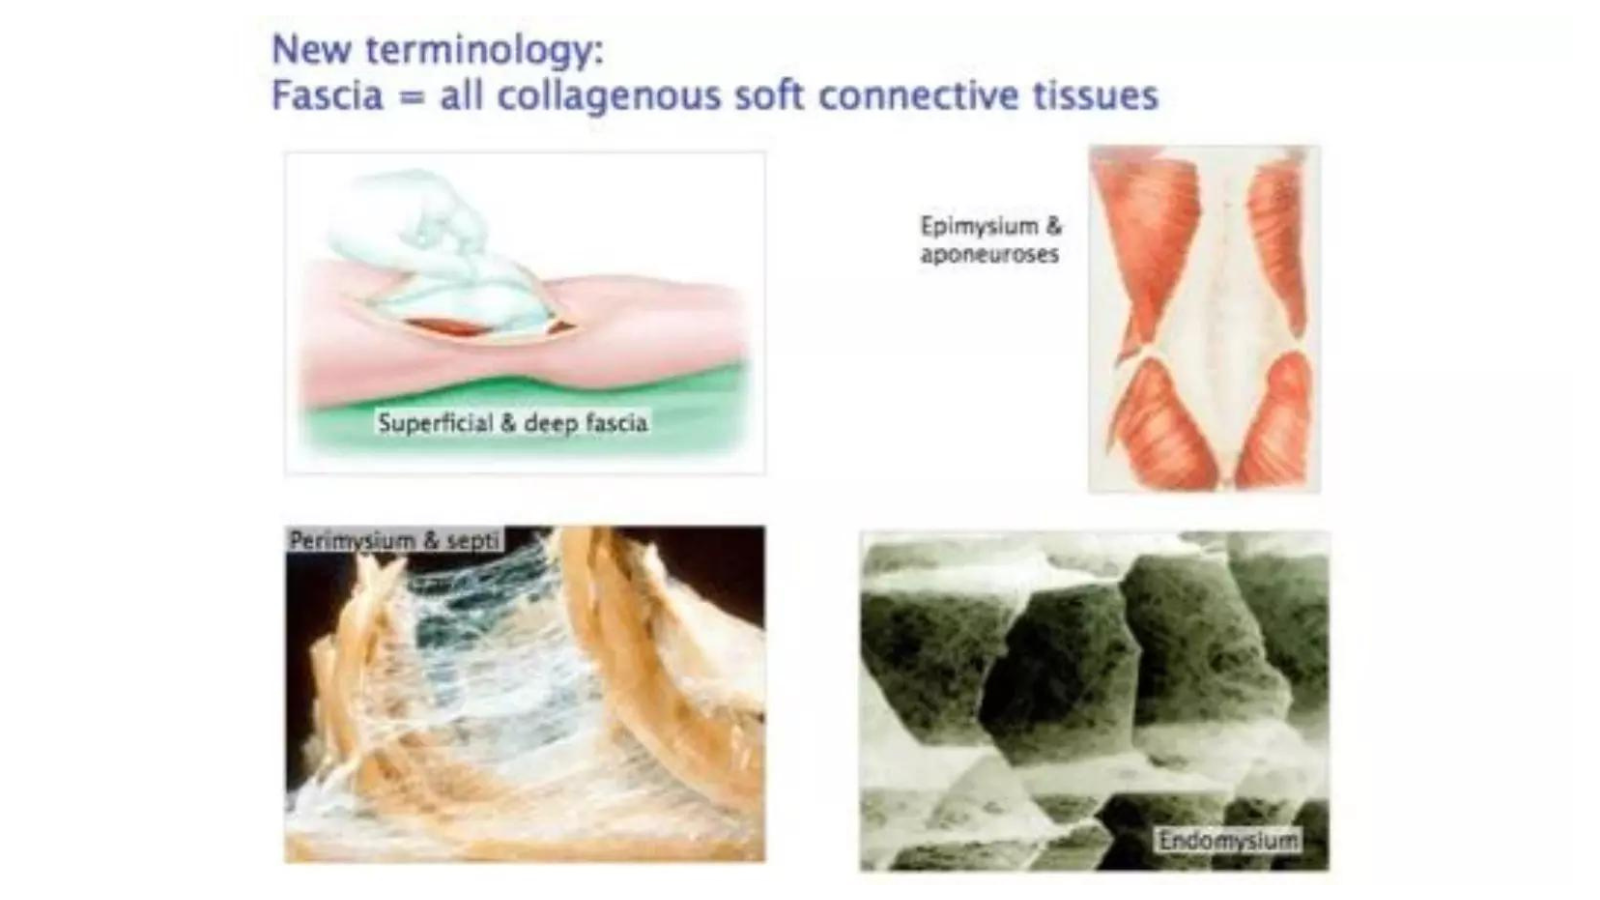 Examples of fascia, which is all collagenous soft connective tissues 